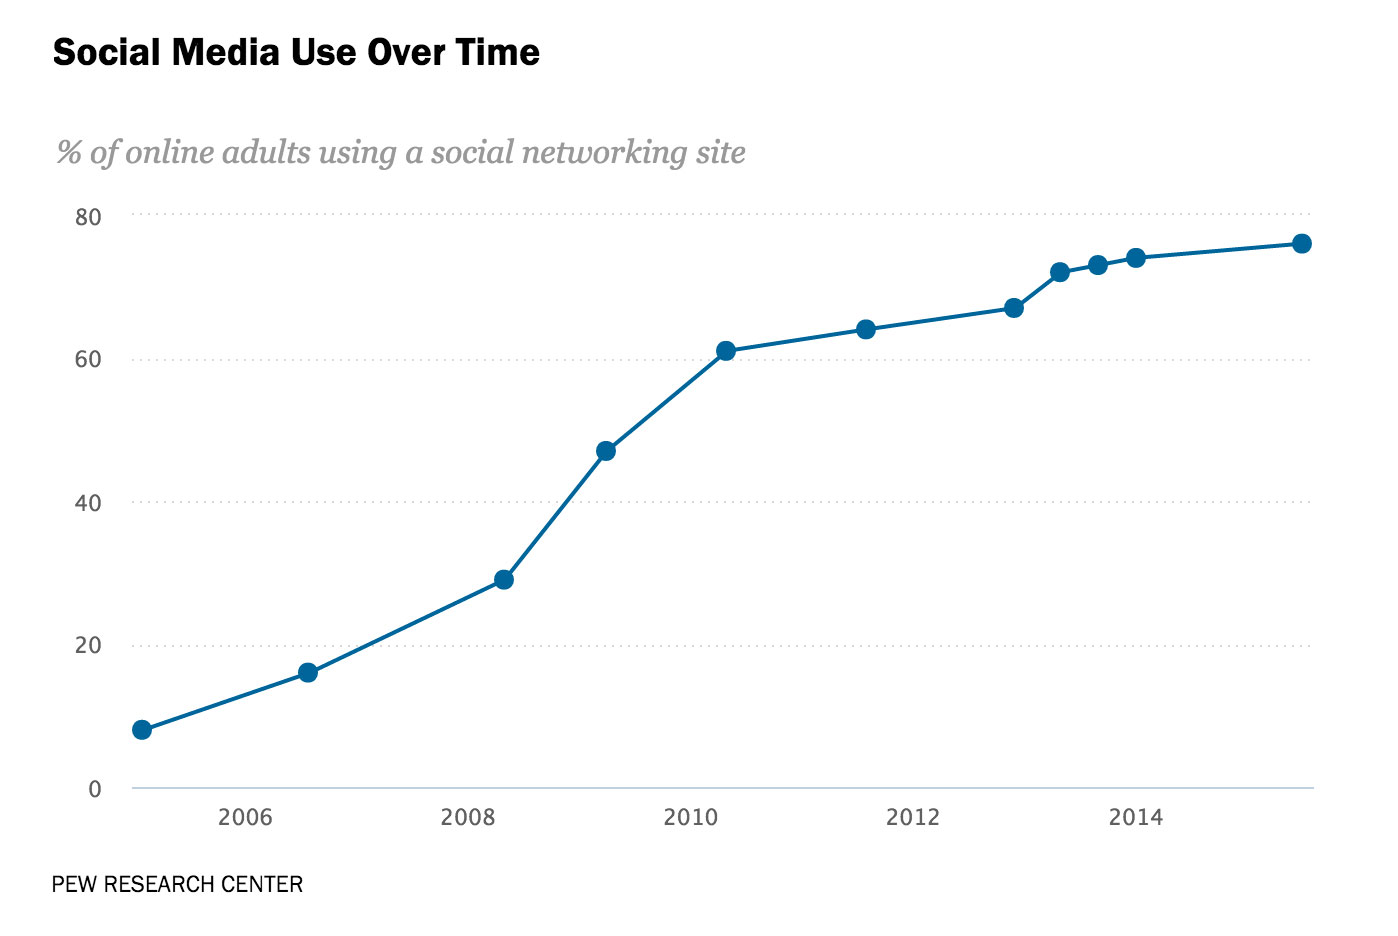 Usage of social networks in the US has surged.